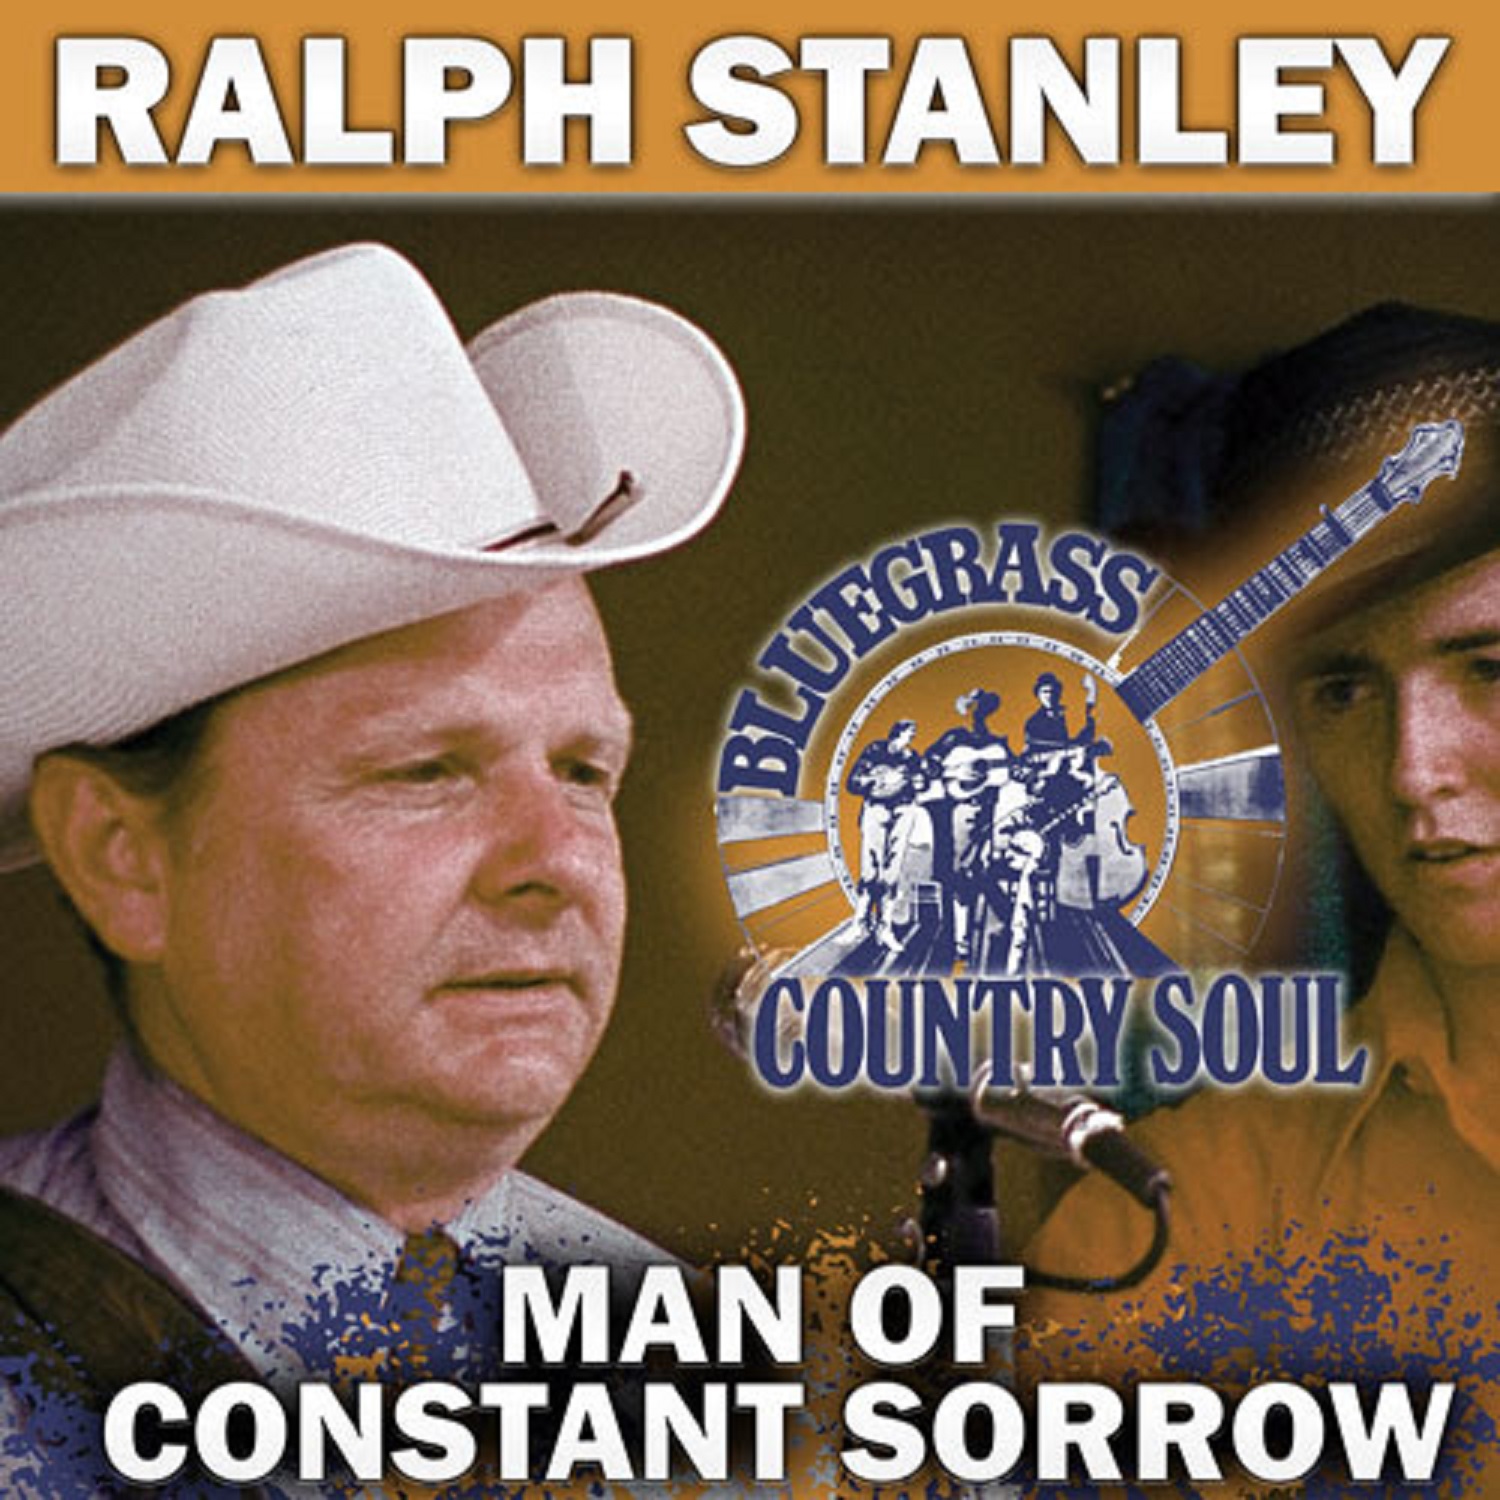 Ralph Stanley and J.D. Crowe Legendary Live Recordings Released